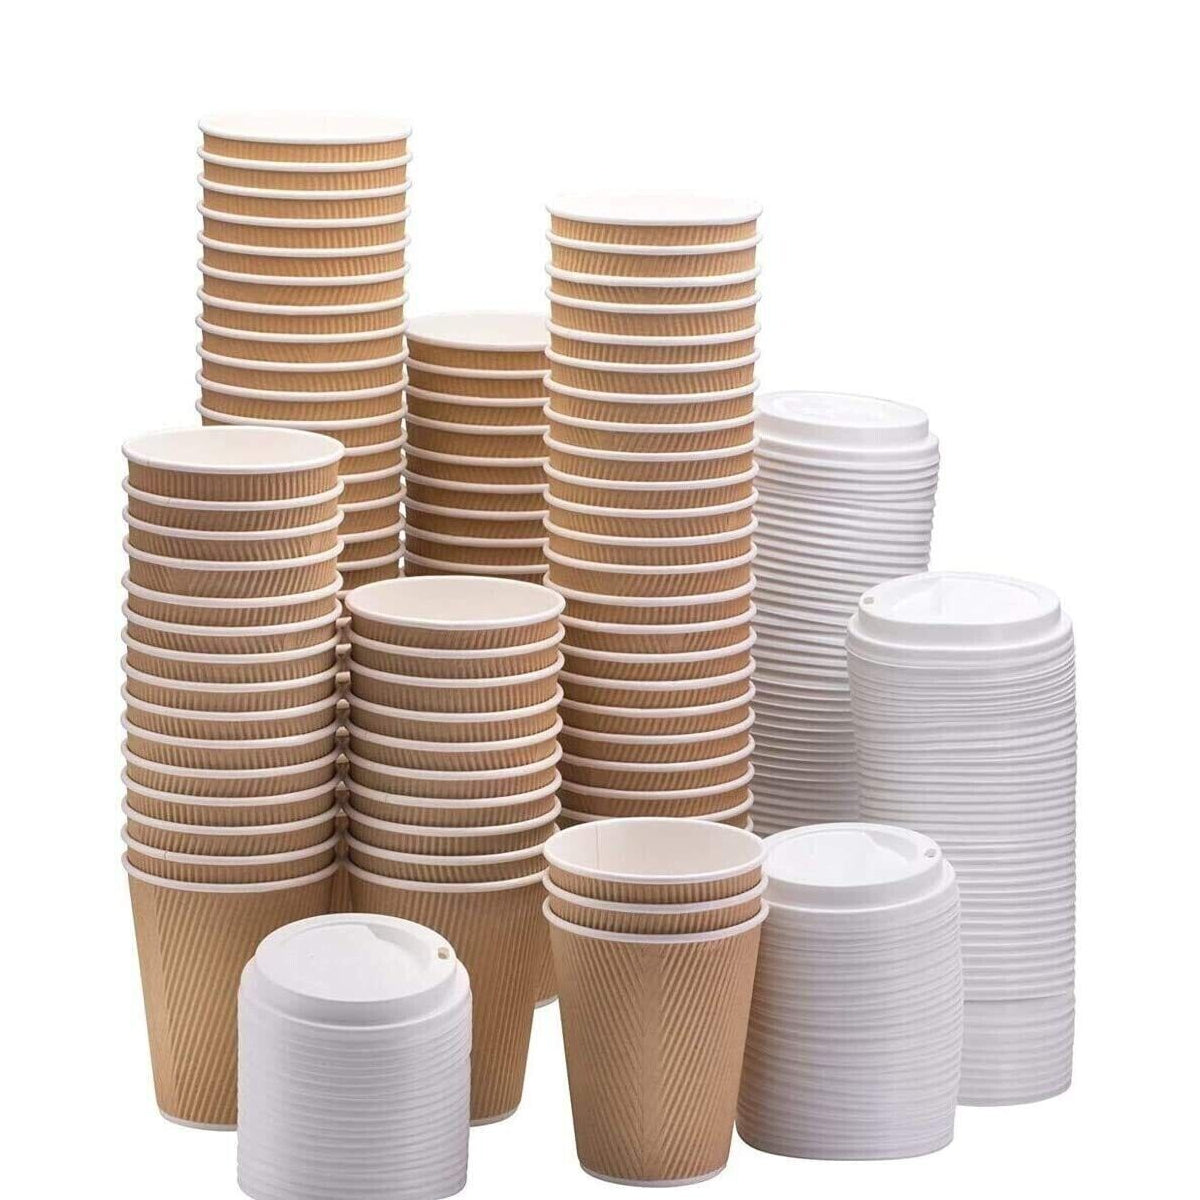 Disposable Cups With Lid 8 Oz - 500 Pcs